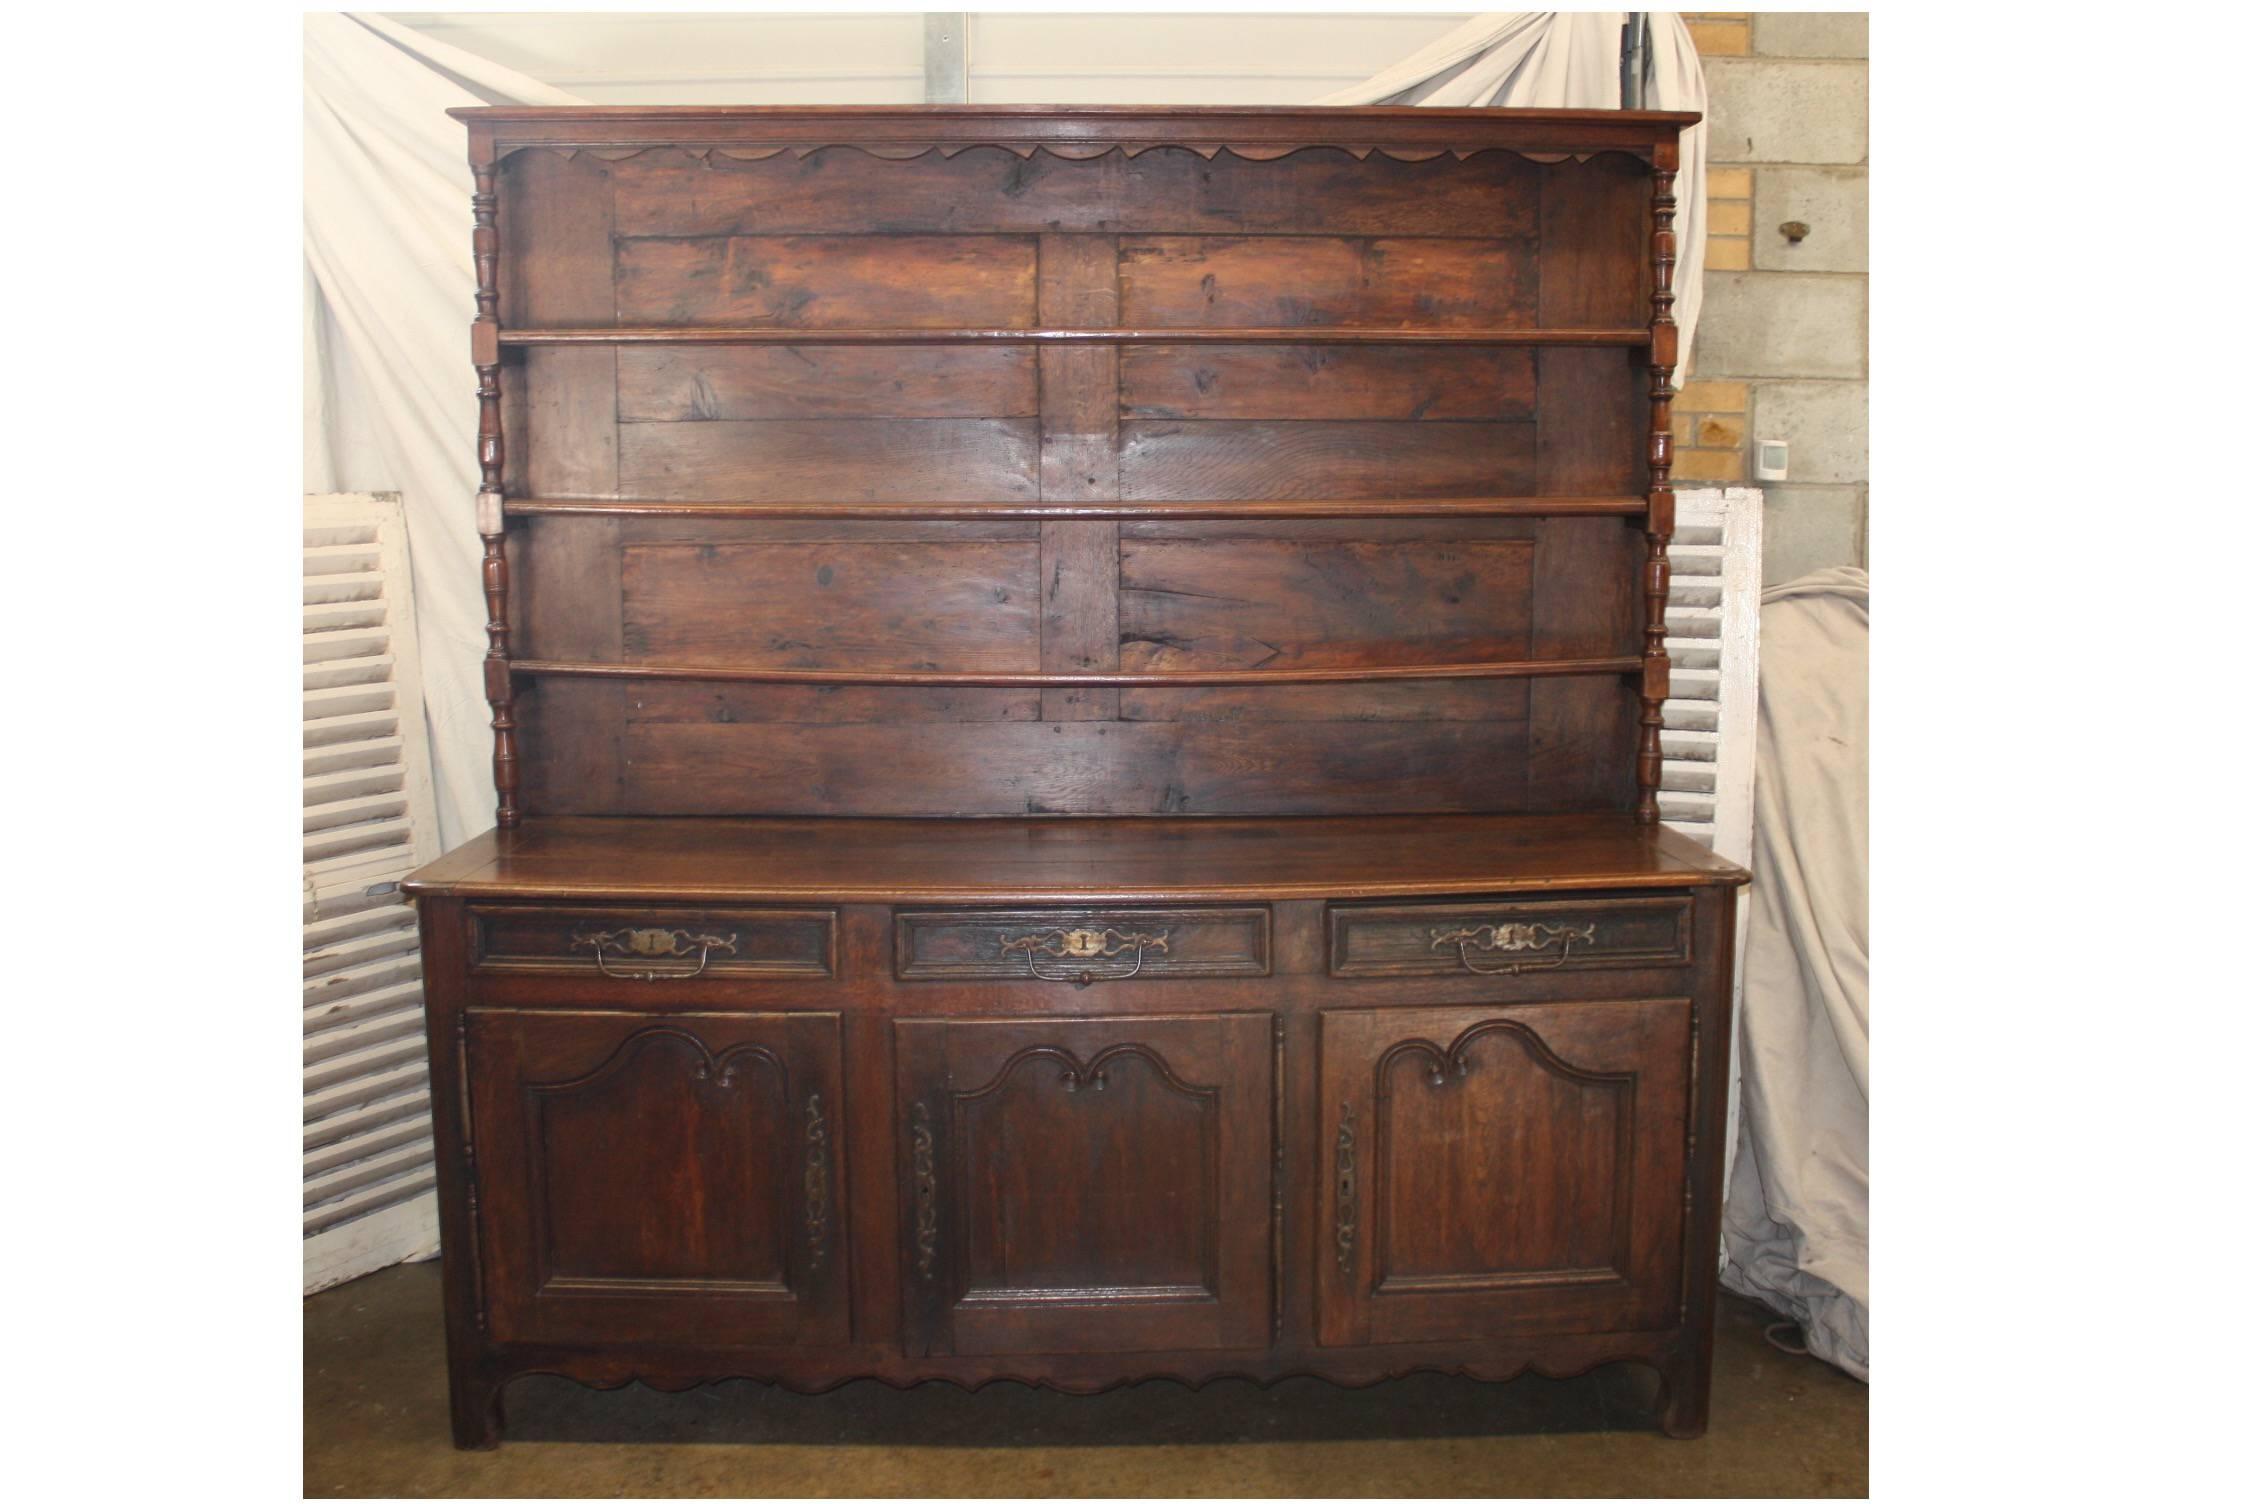 Remarkable 18th century French hutch, Louis XV period.